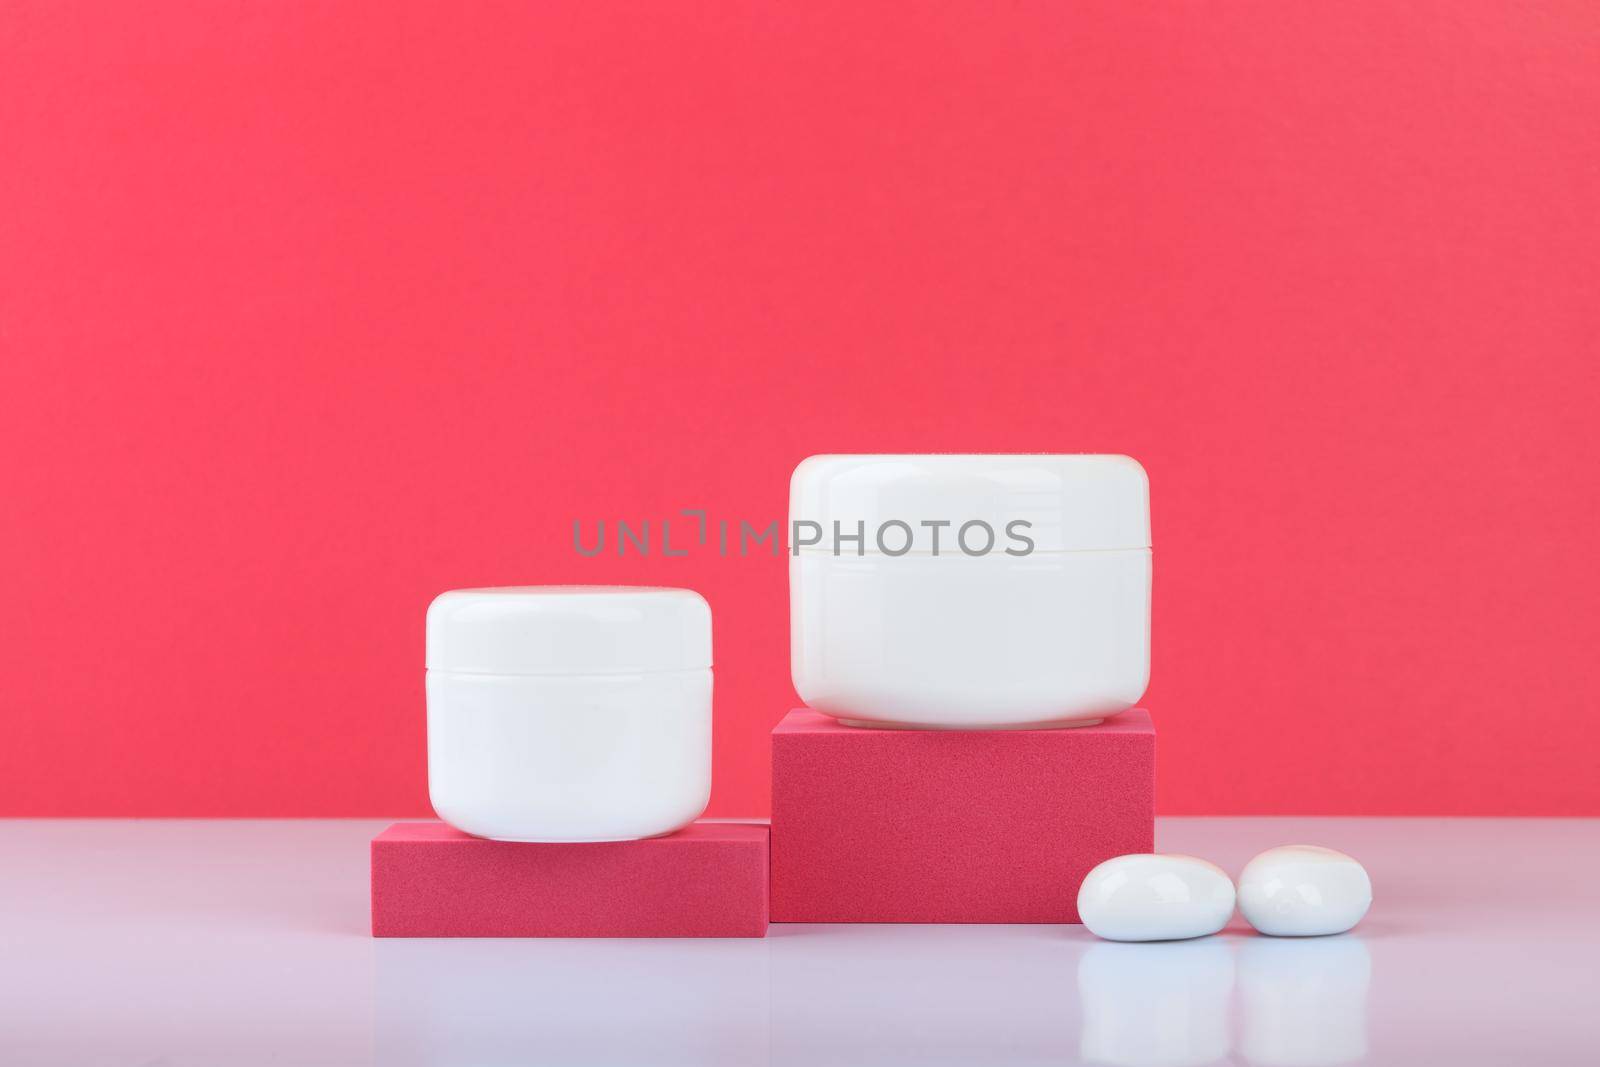 Still life with white glossy cream jars on podiums with white stones on white table against pink background with space for text. Concept of beauty. High quality photo